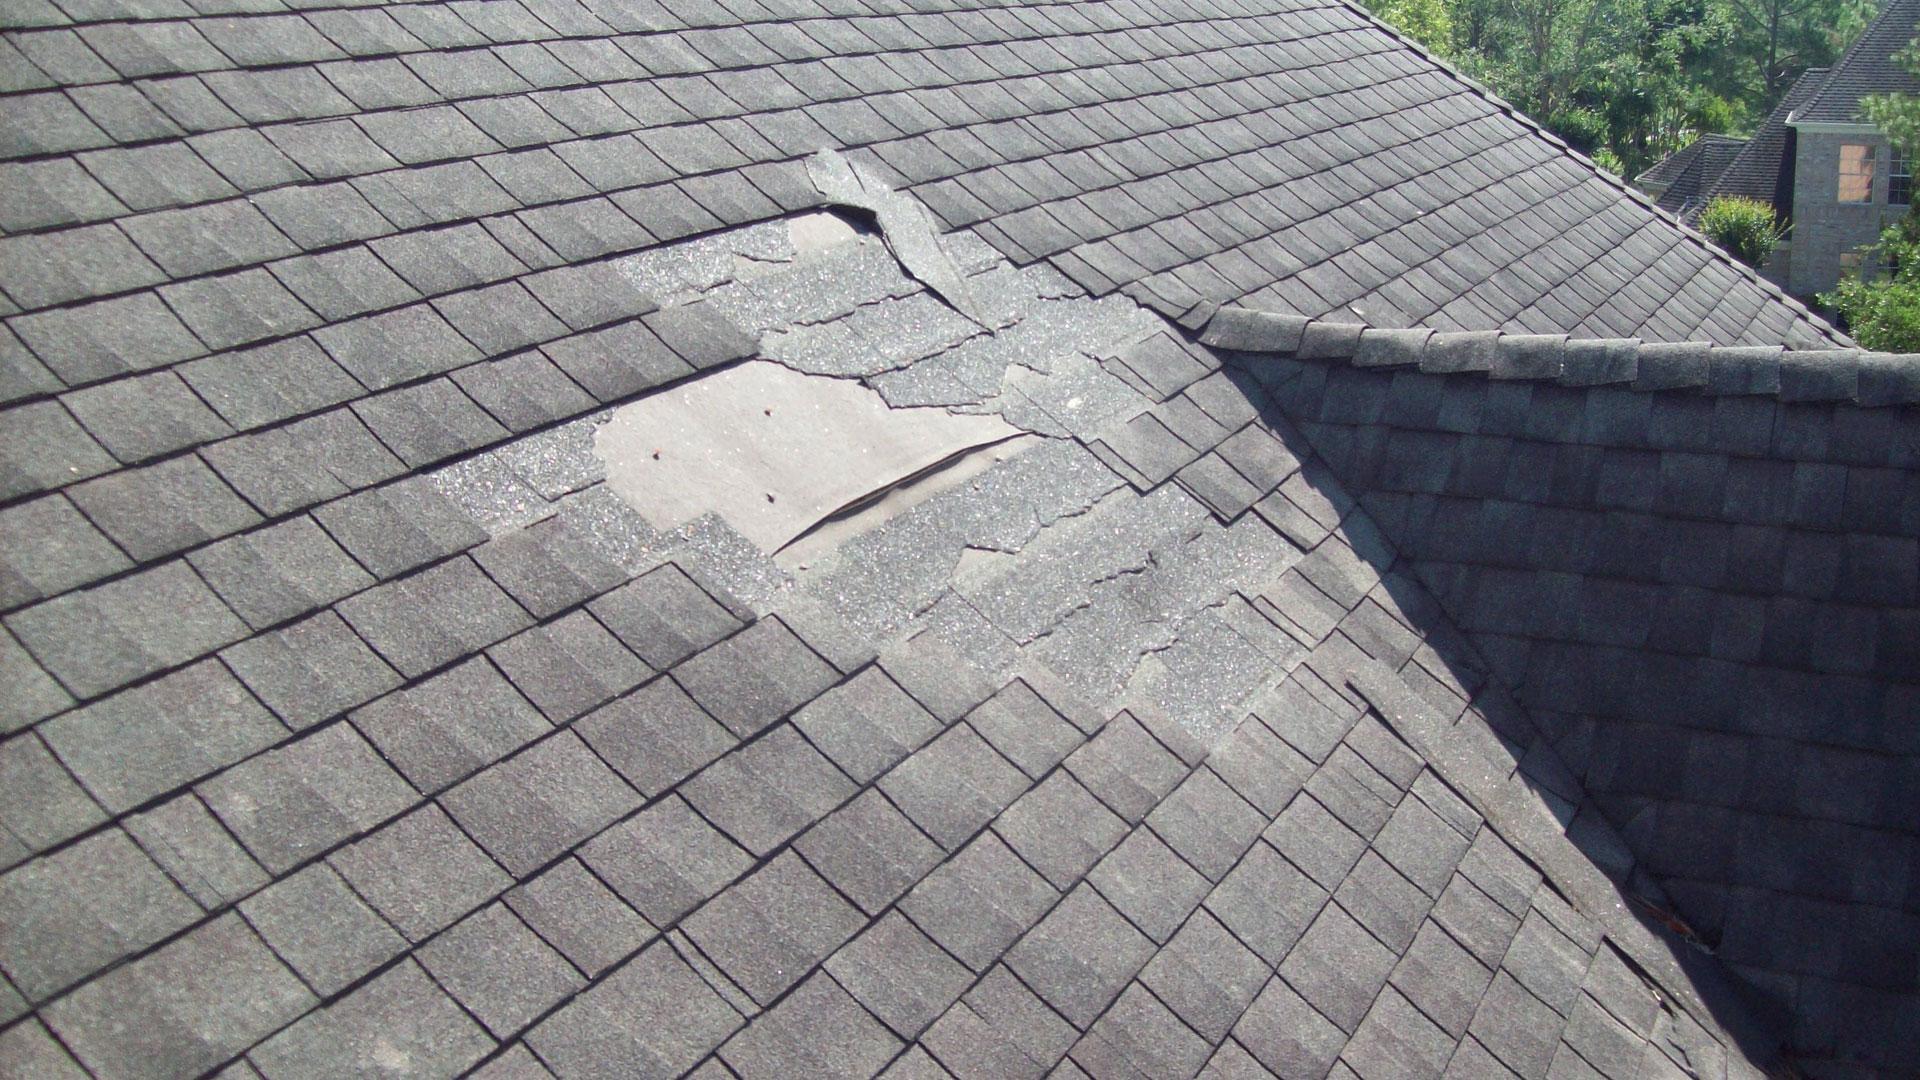 Home in need of roof repair due to mising shingles